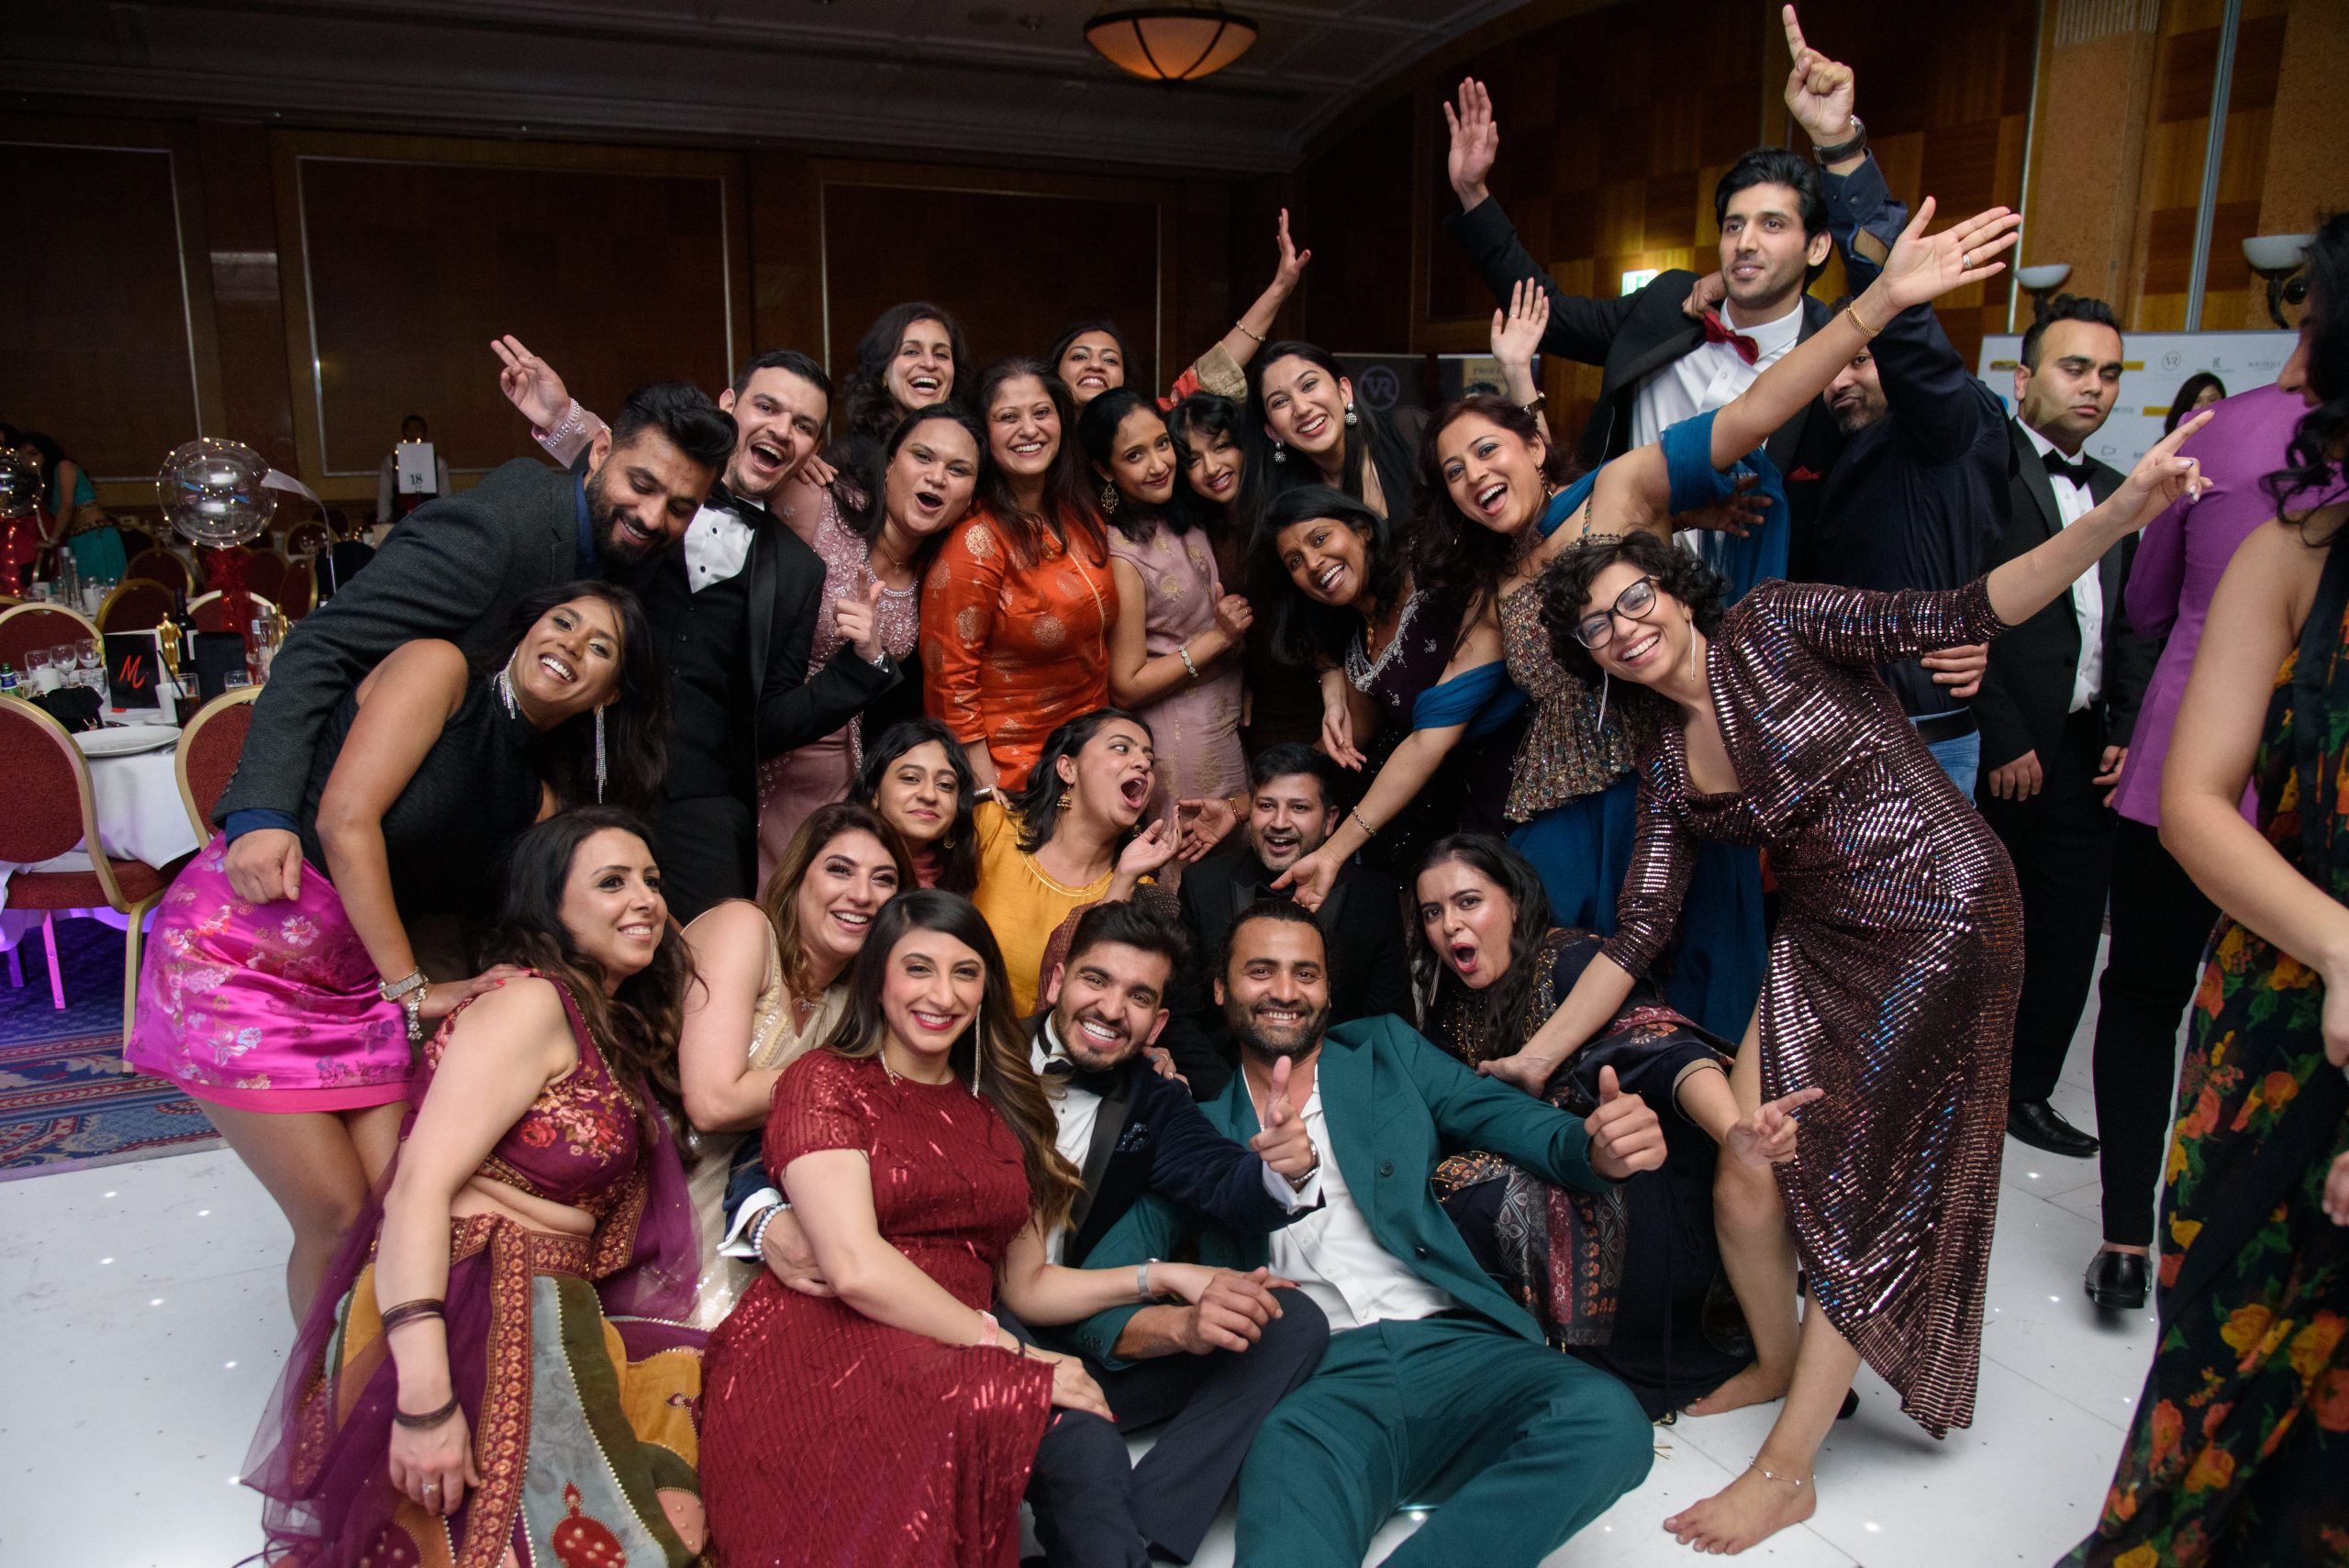 With the Bollywood Dentist's newest event on the horizon, the Dil Se Ball, Chetan Sharma tells us what the evening will entail.